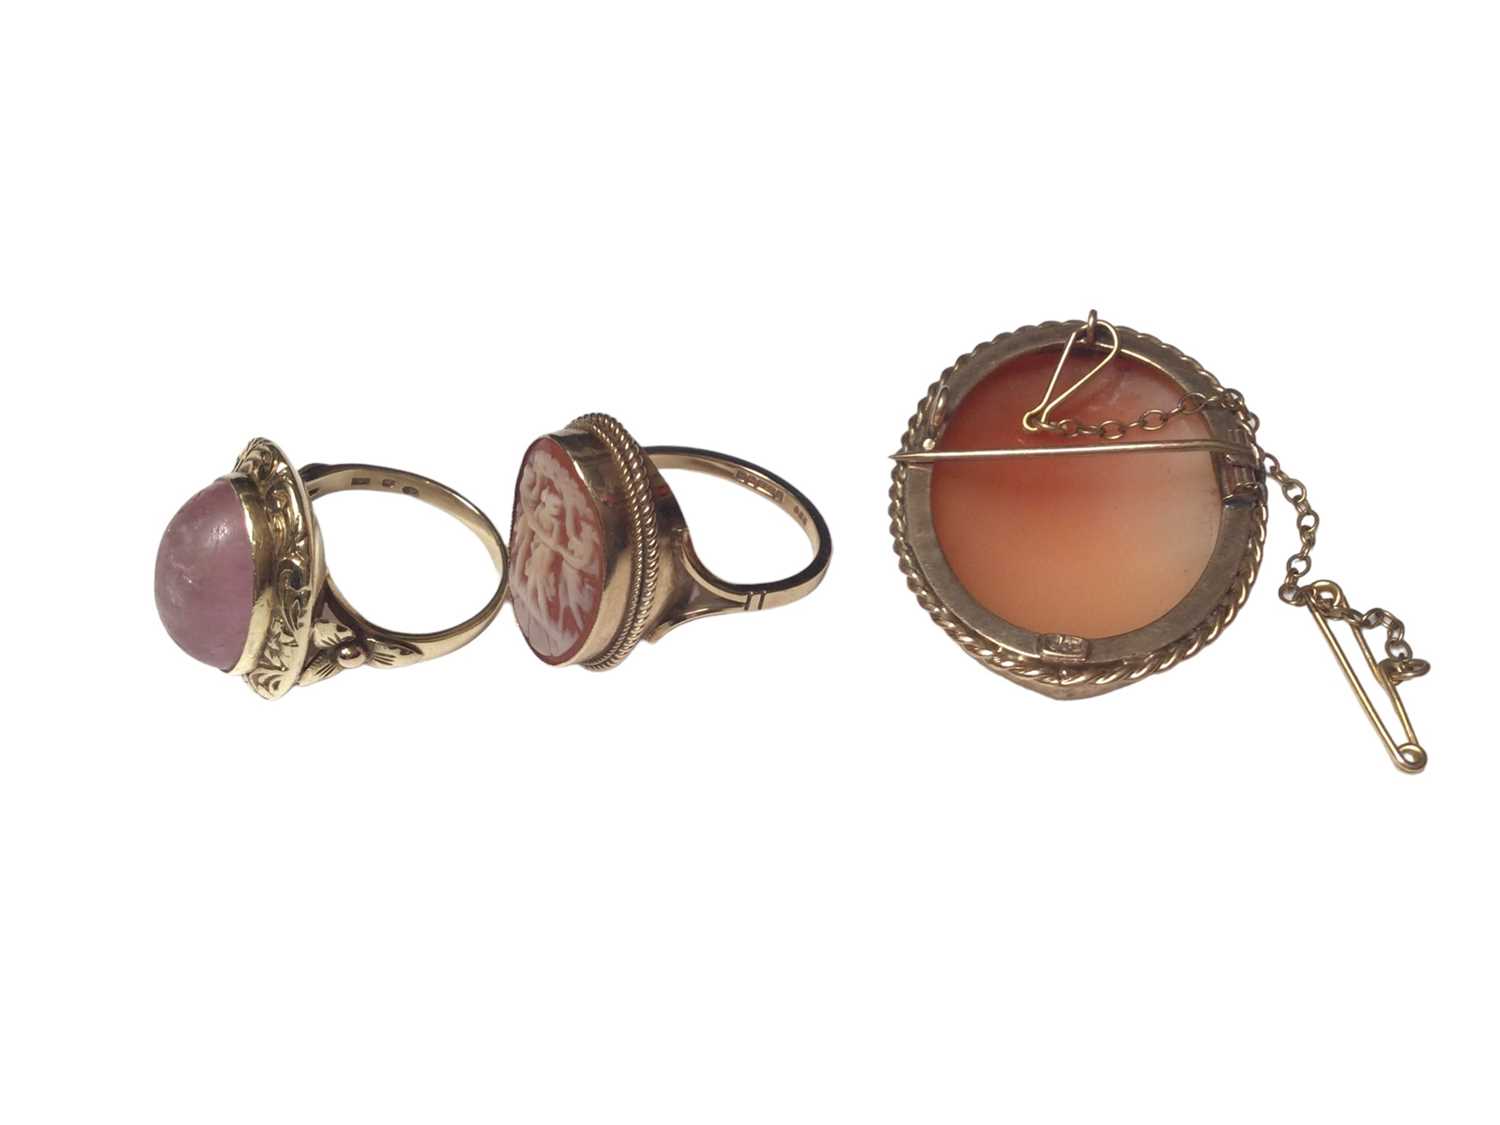 14ct gold rose quartz cabochon ring in a floral scroll engraved mount, together with a 9ct gold carv - Image 2 of 3